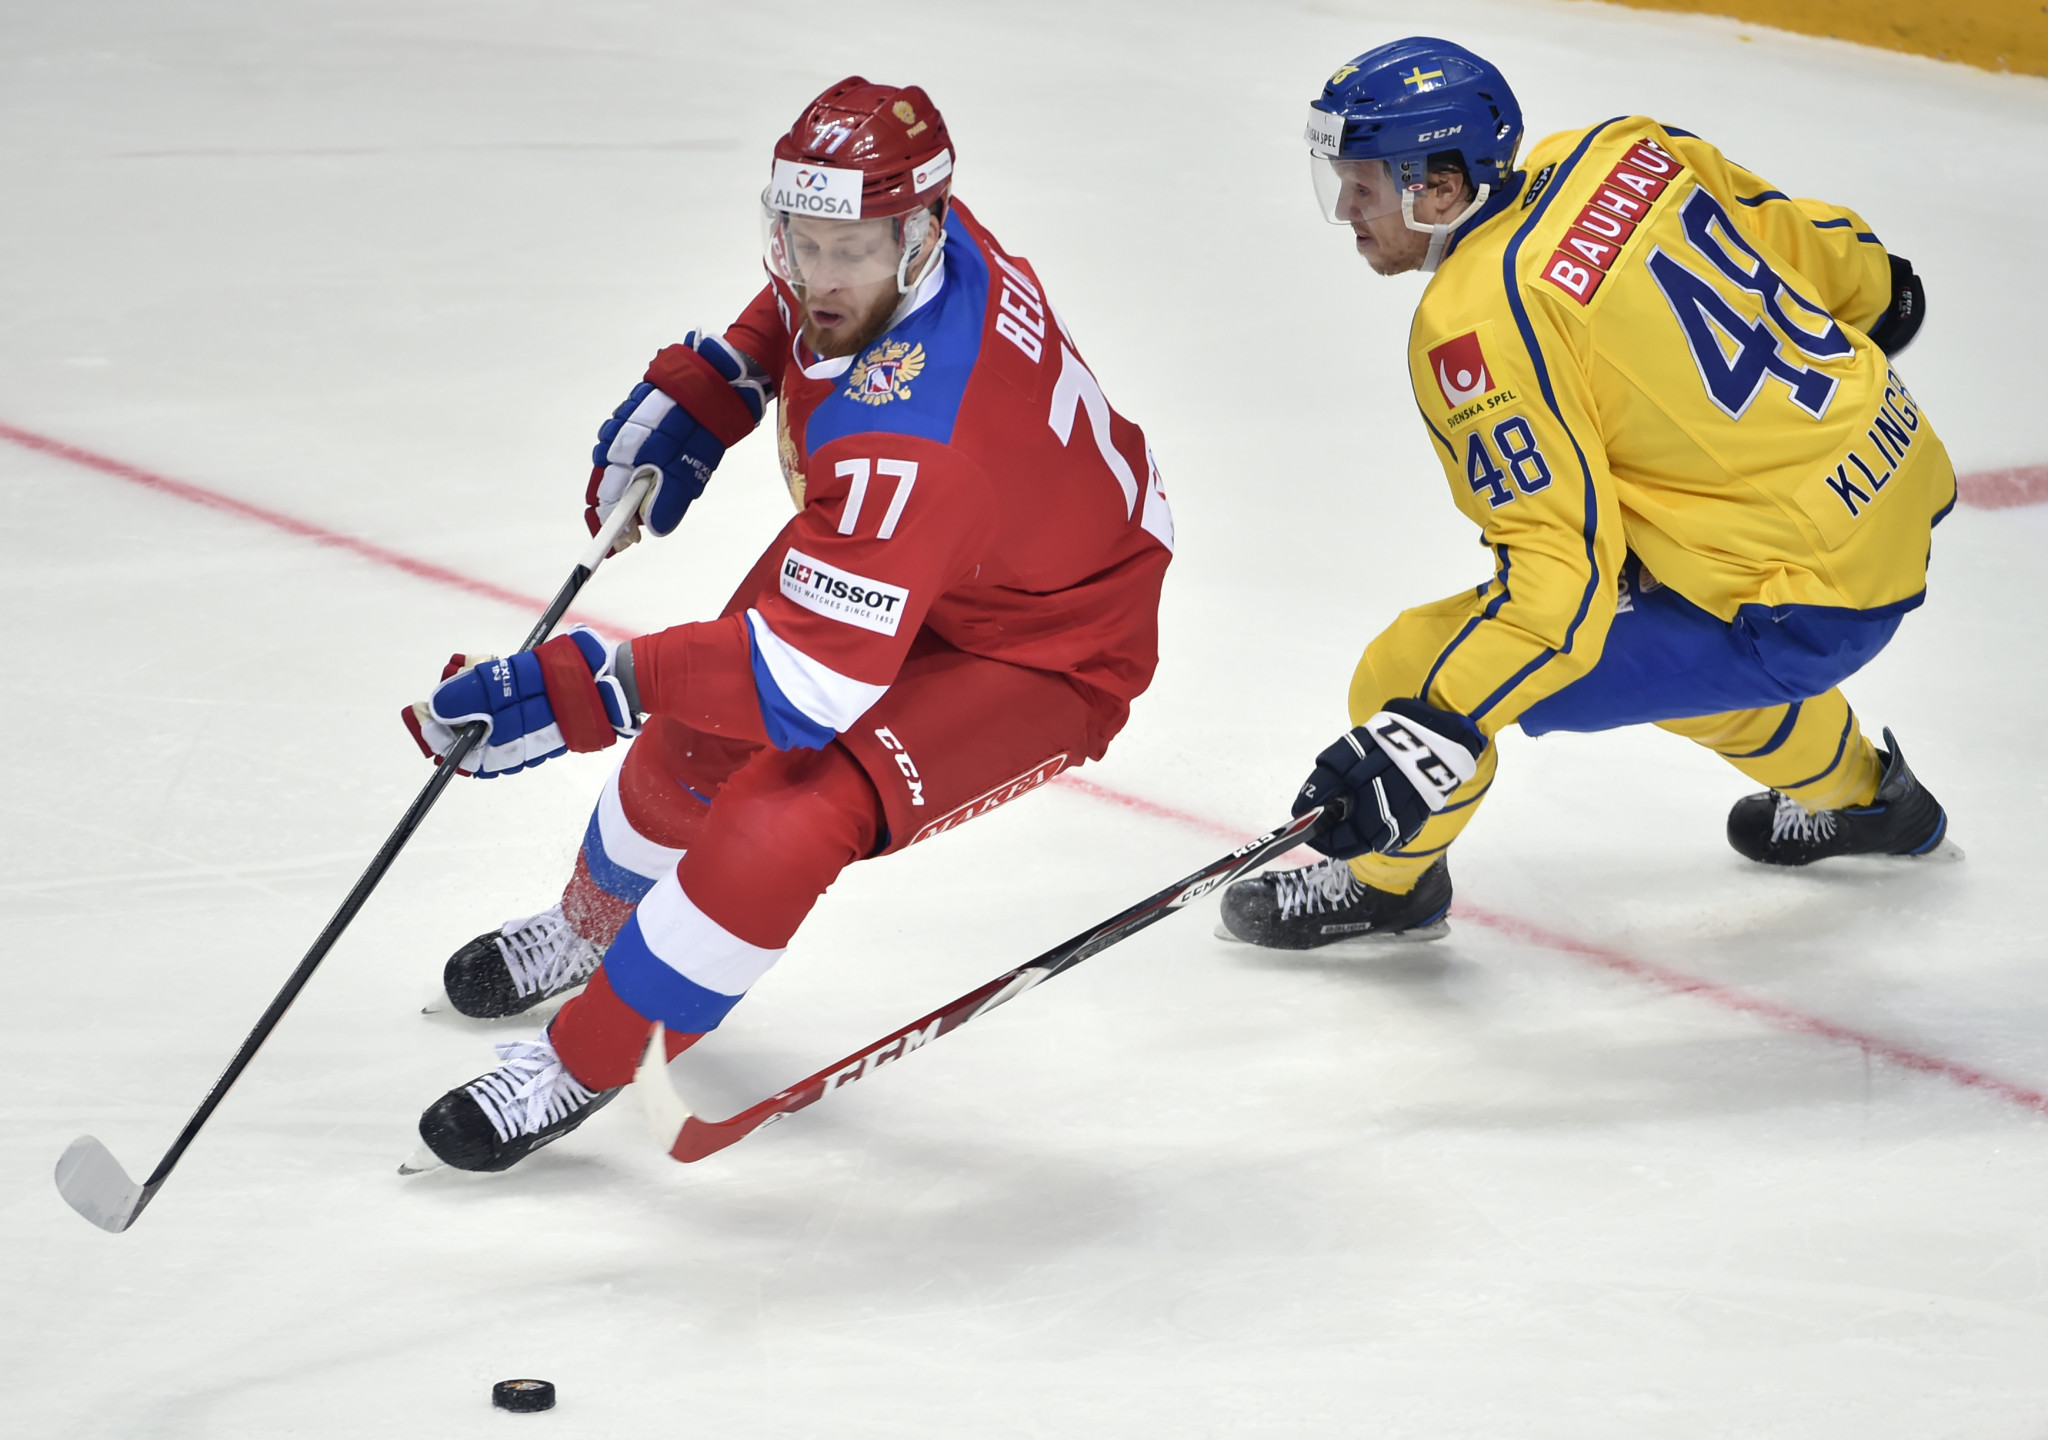 Former NHL player Anton Belov was considered a possibility for the Olympic Athletes from Russia ice hockey team until the IOC banned him, a decision he is now appealing against ©Getty Images